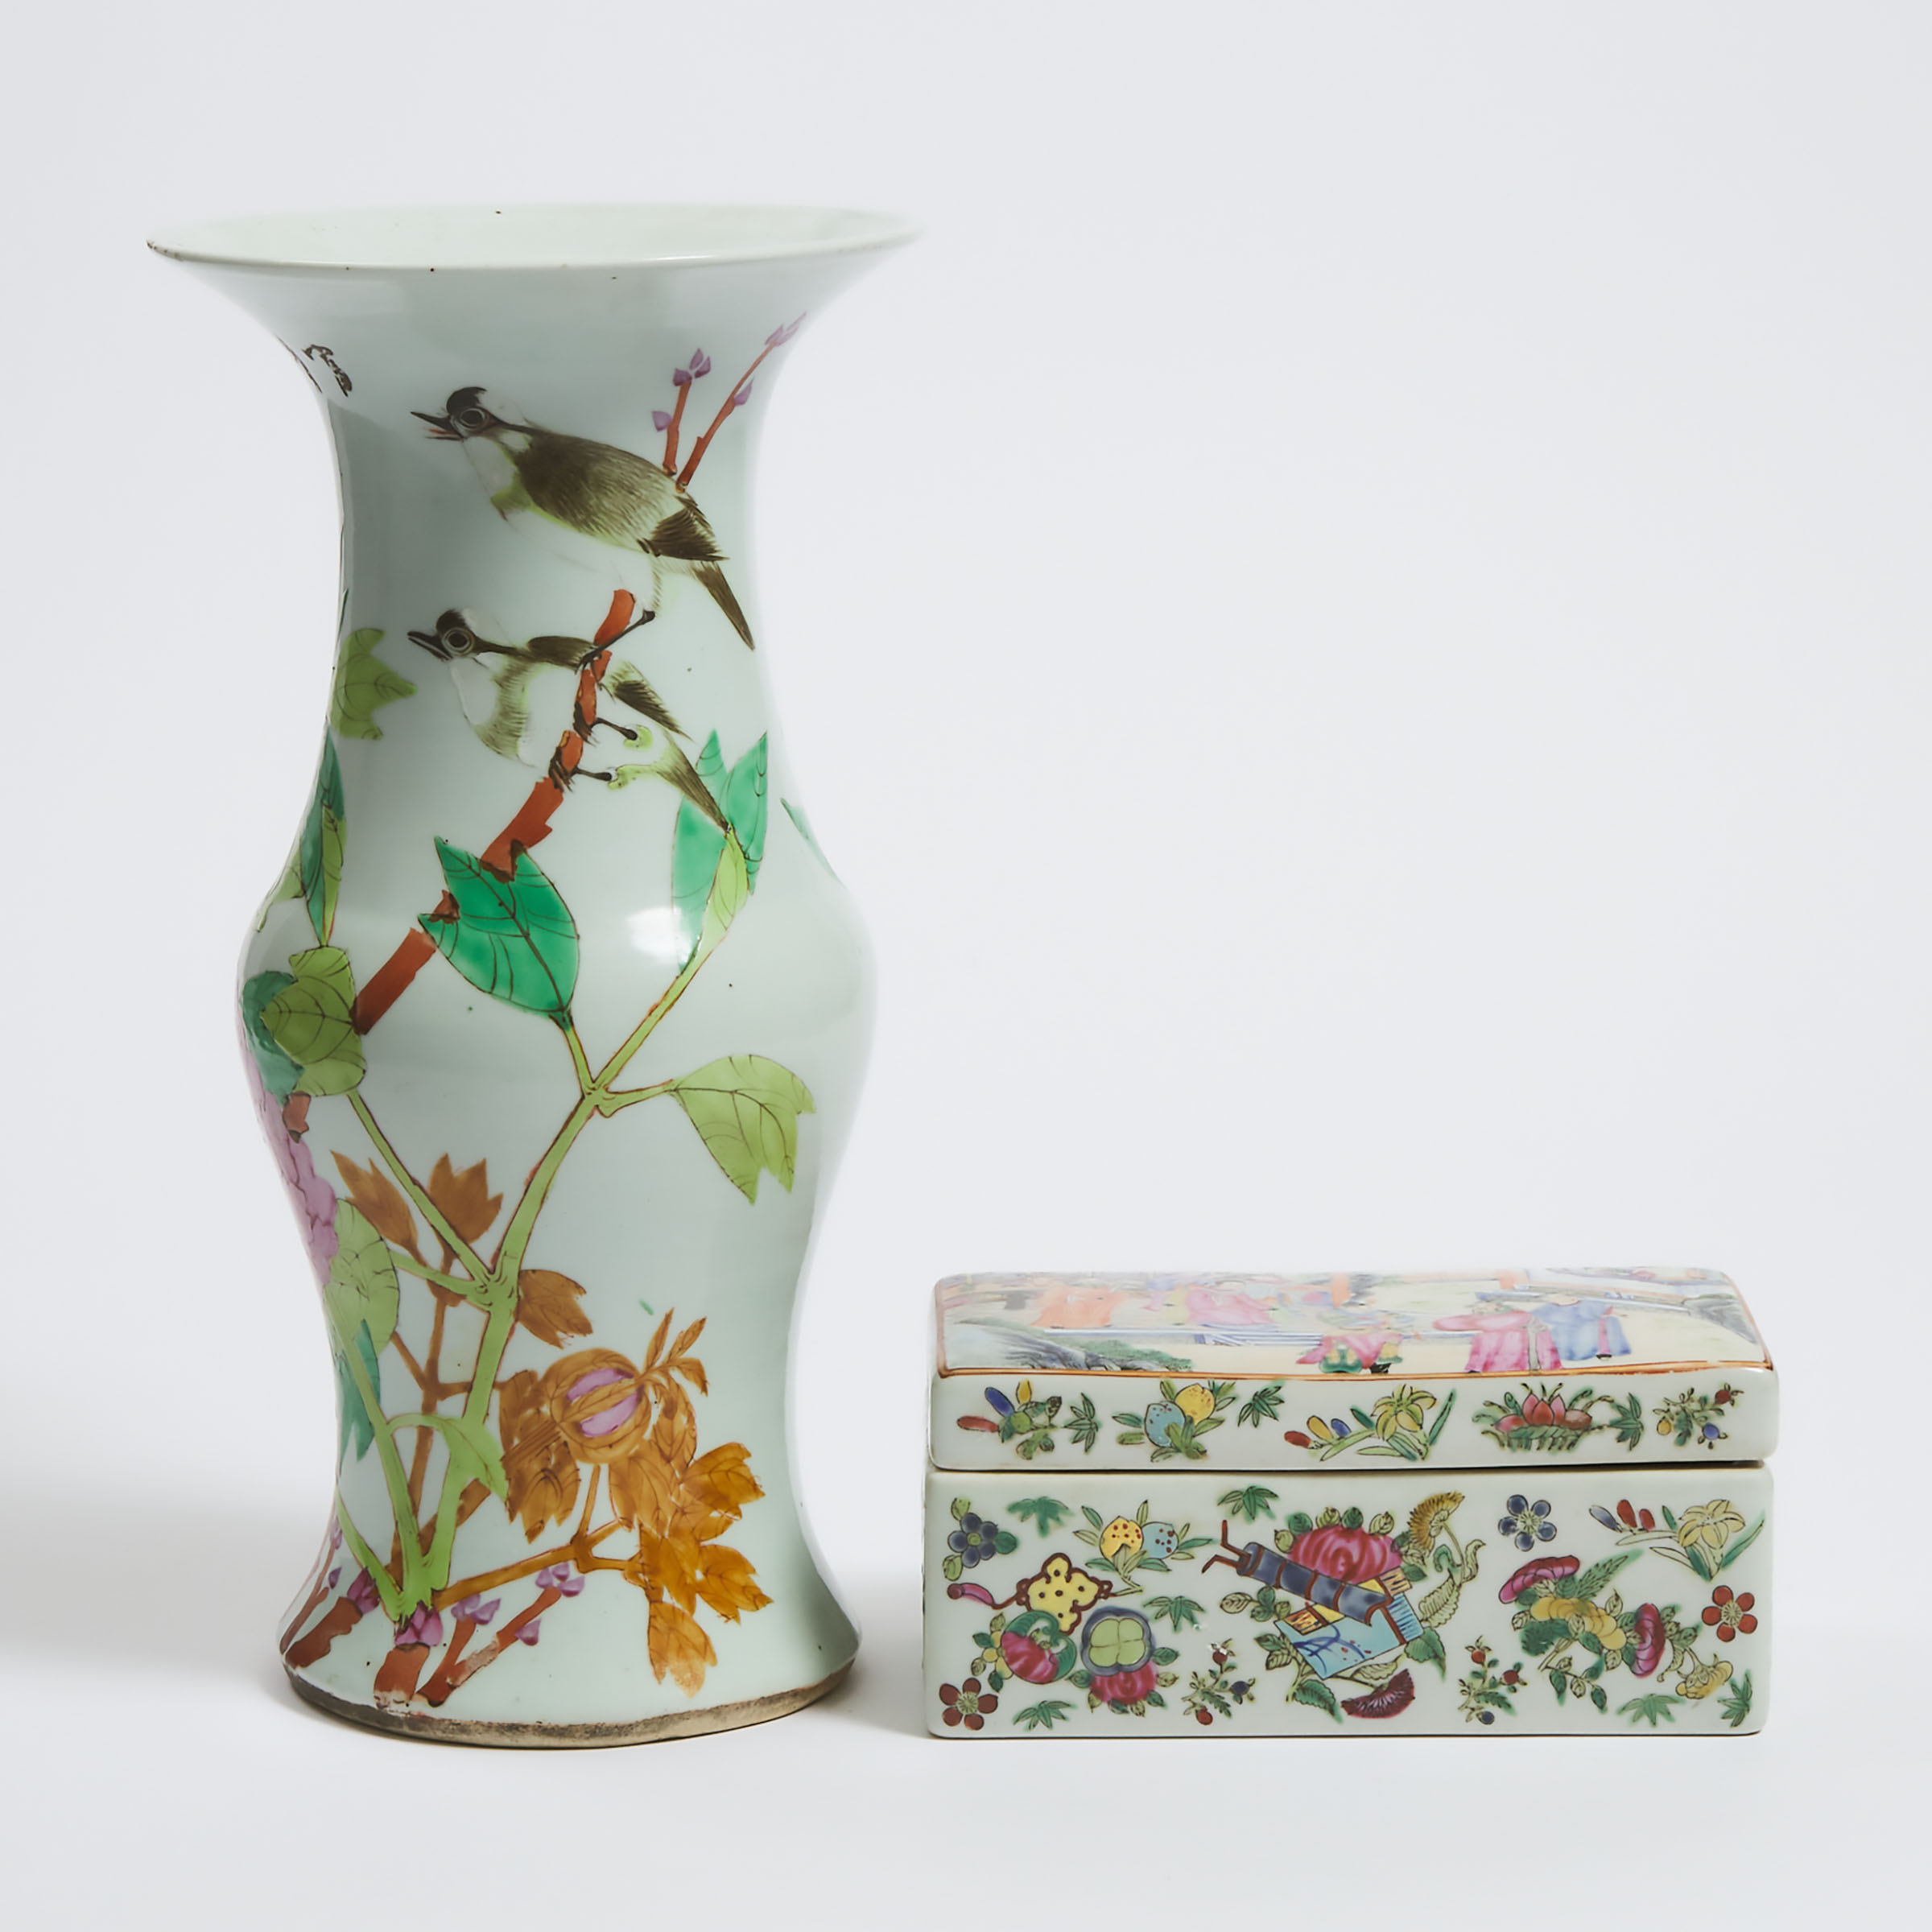 A Famille Rose Rectangular Box and Cover, Together With an Enameled Vase, 19th/Early 20th Century